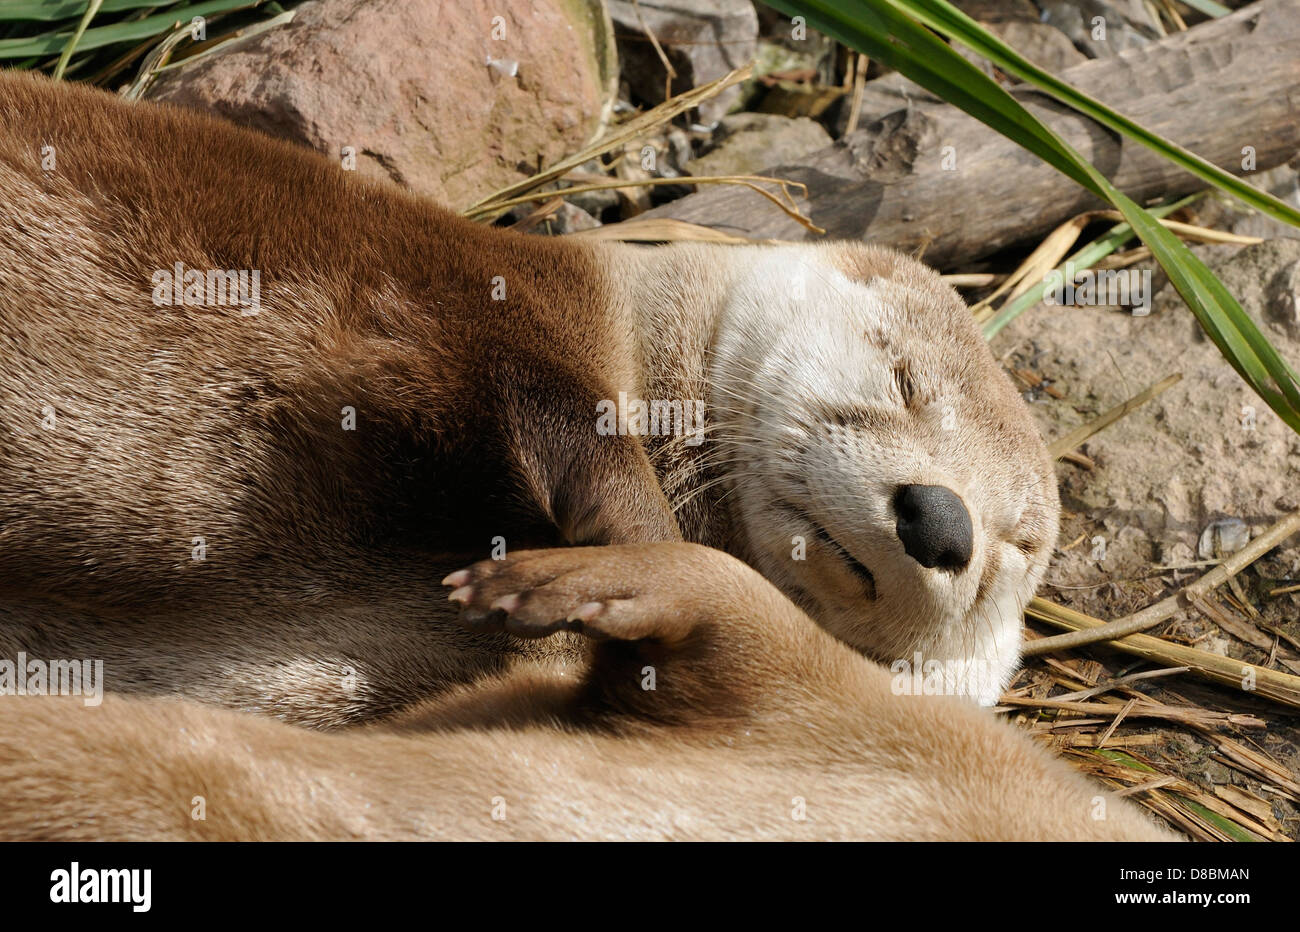 North American River Otter - Lontra canadensis Banque D'Images